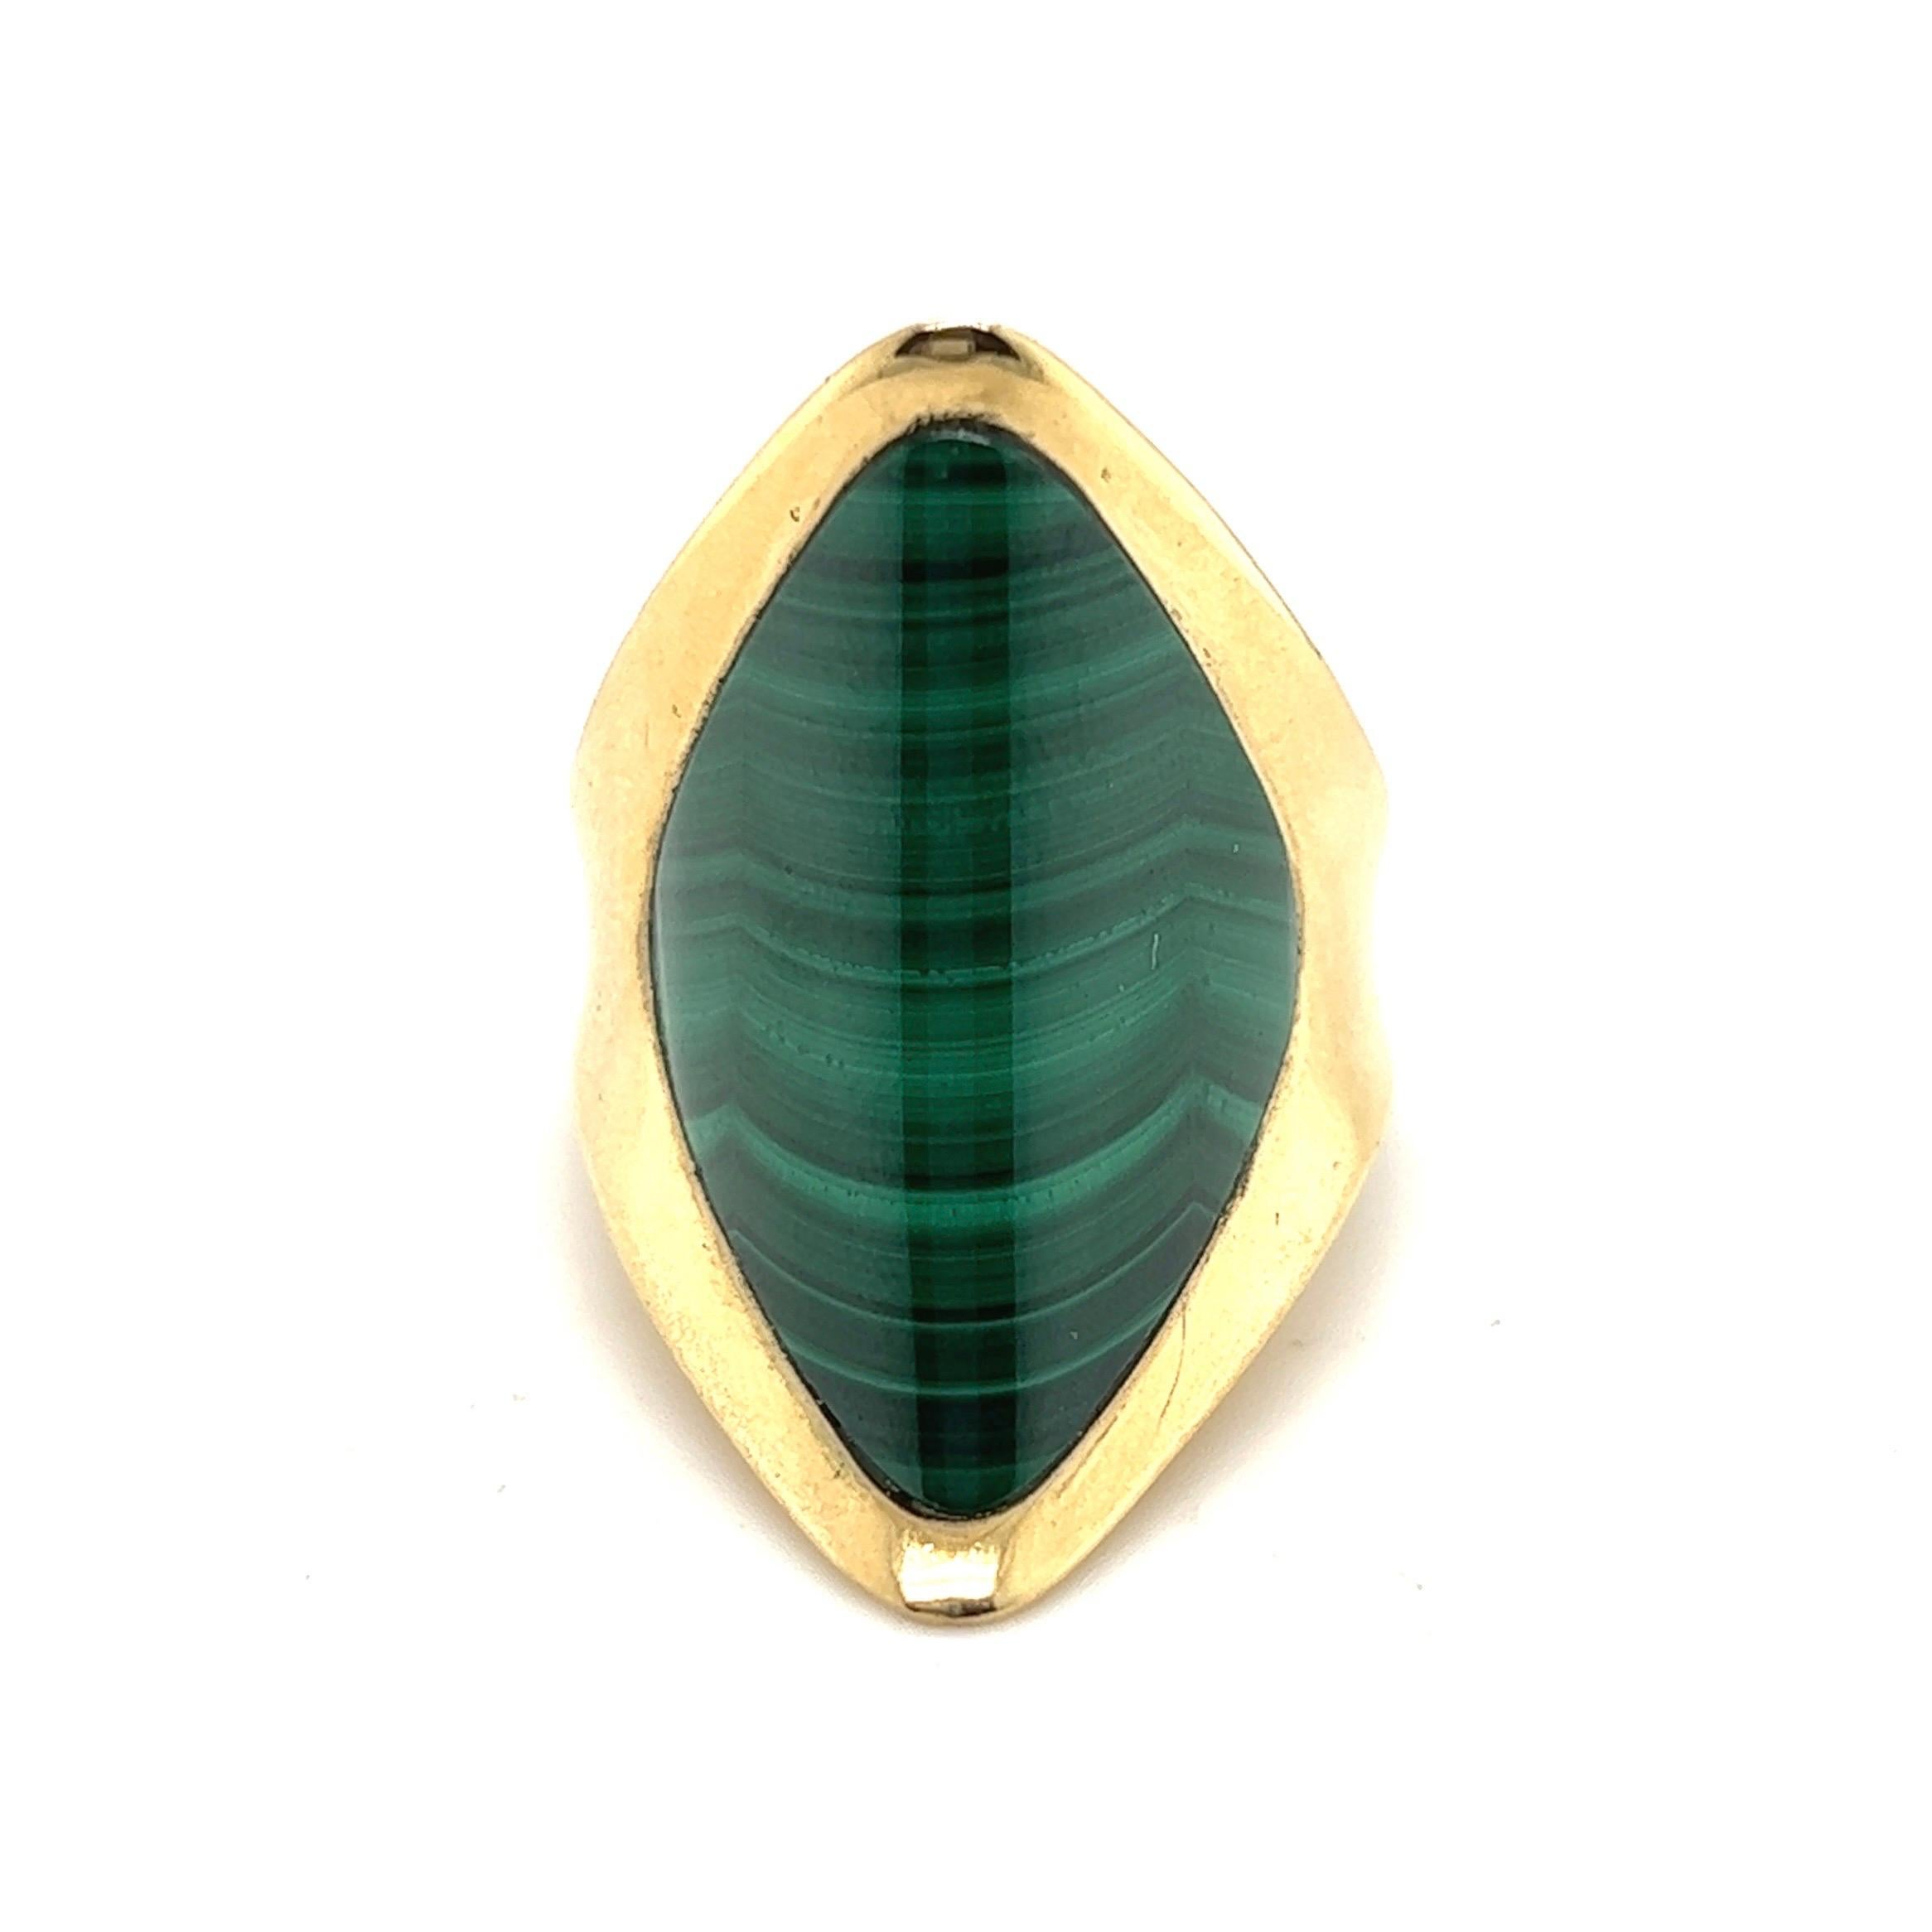 Stylish 18 karat yellow gold and malachite cocktail ring by Piaget, circa 1970s.

Crafted in 18 karat yellow gold, this attractive sculpural ring is set with a slightly concave lozenge-shaped malachite.
This beautiful pre-owned ring has been